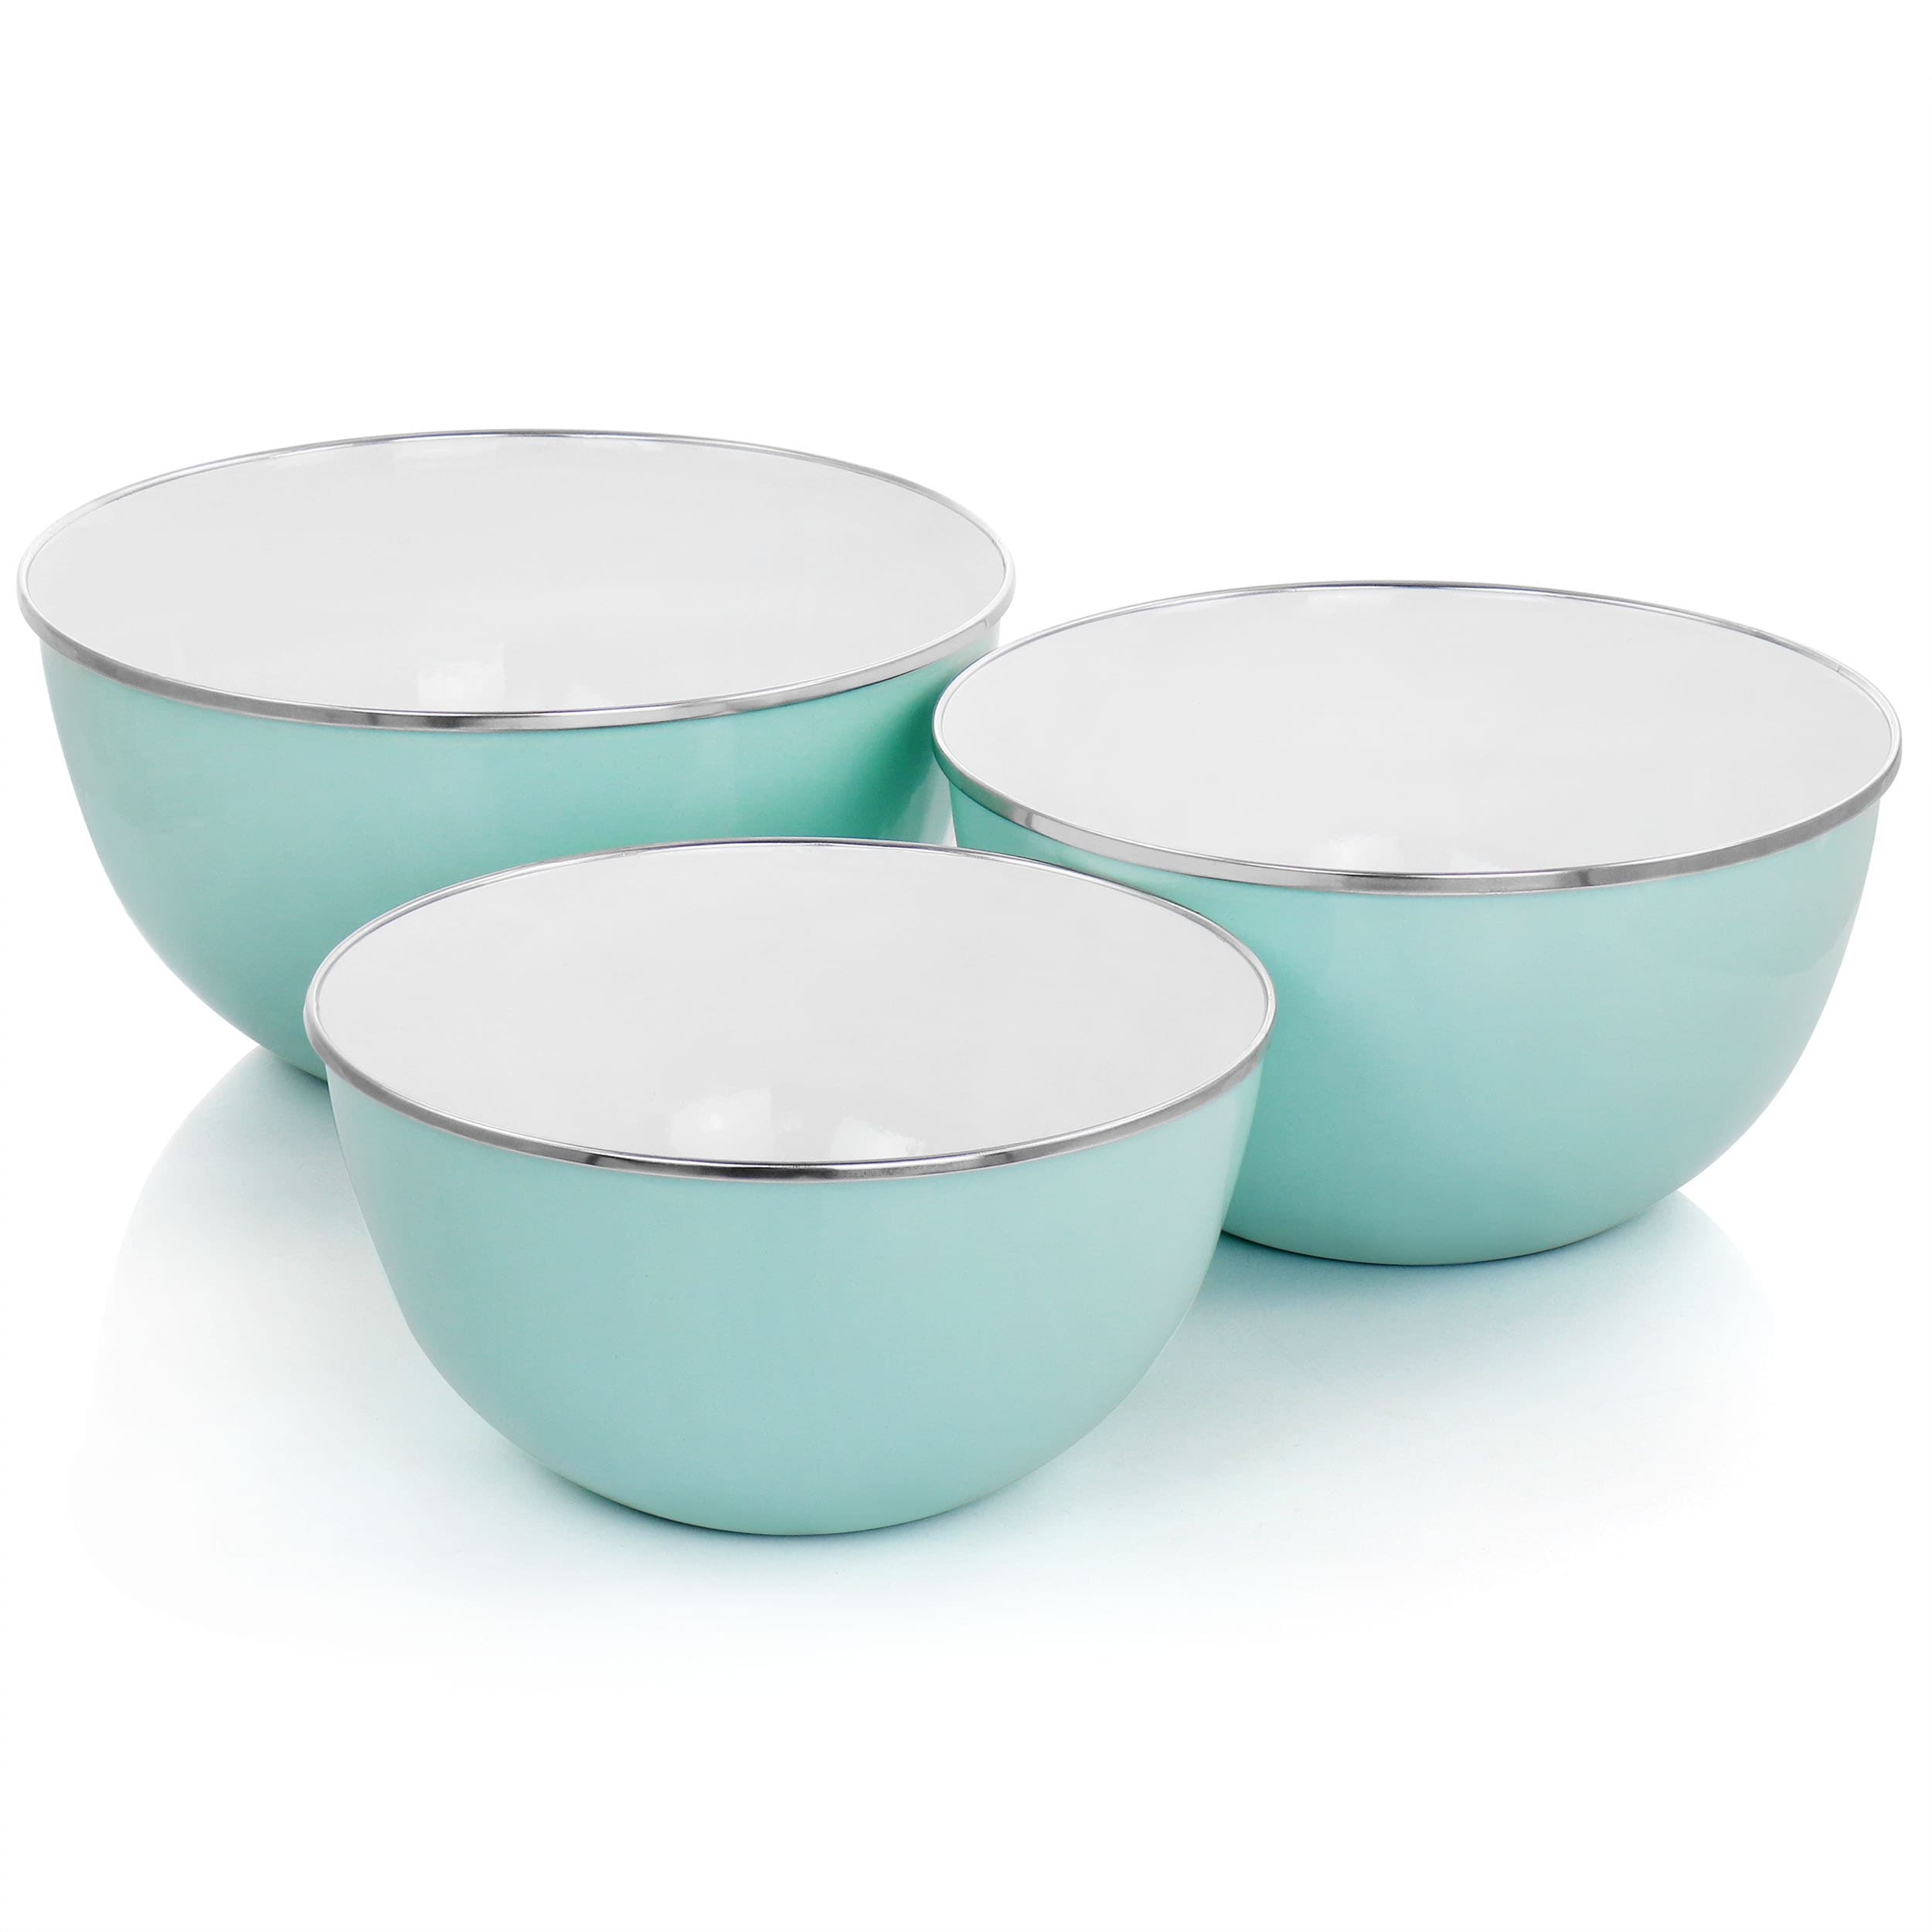 https://ak1.ostkcdn.com/images/products/is/images/direct/75862ad4c5bc624767a40feae16e4f8596fda110/Martha-Stewart-6-Piece-Enamel-Mixing-Bowl-and-Lid-Set.jpg